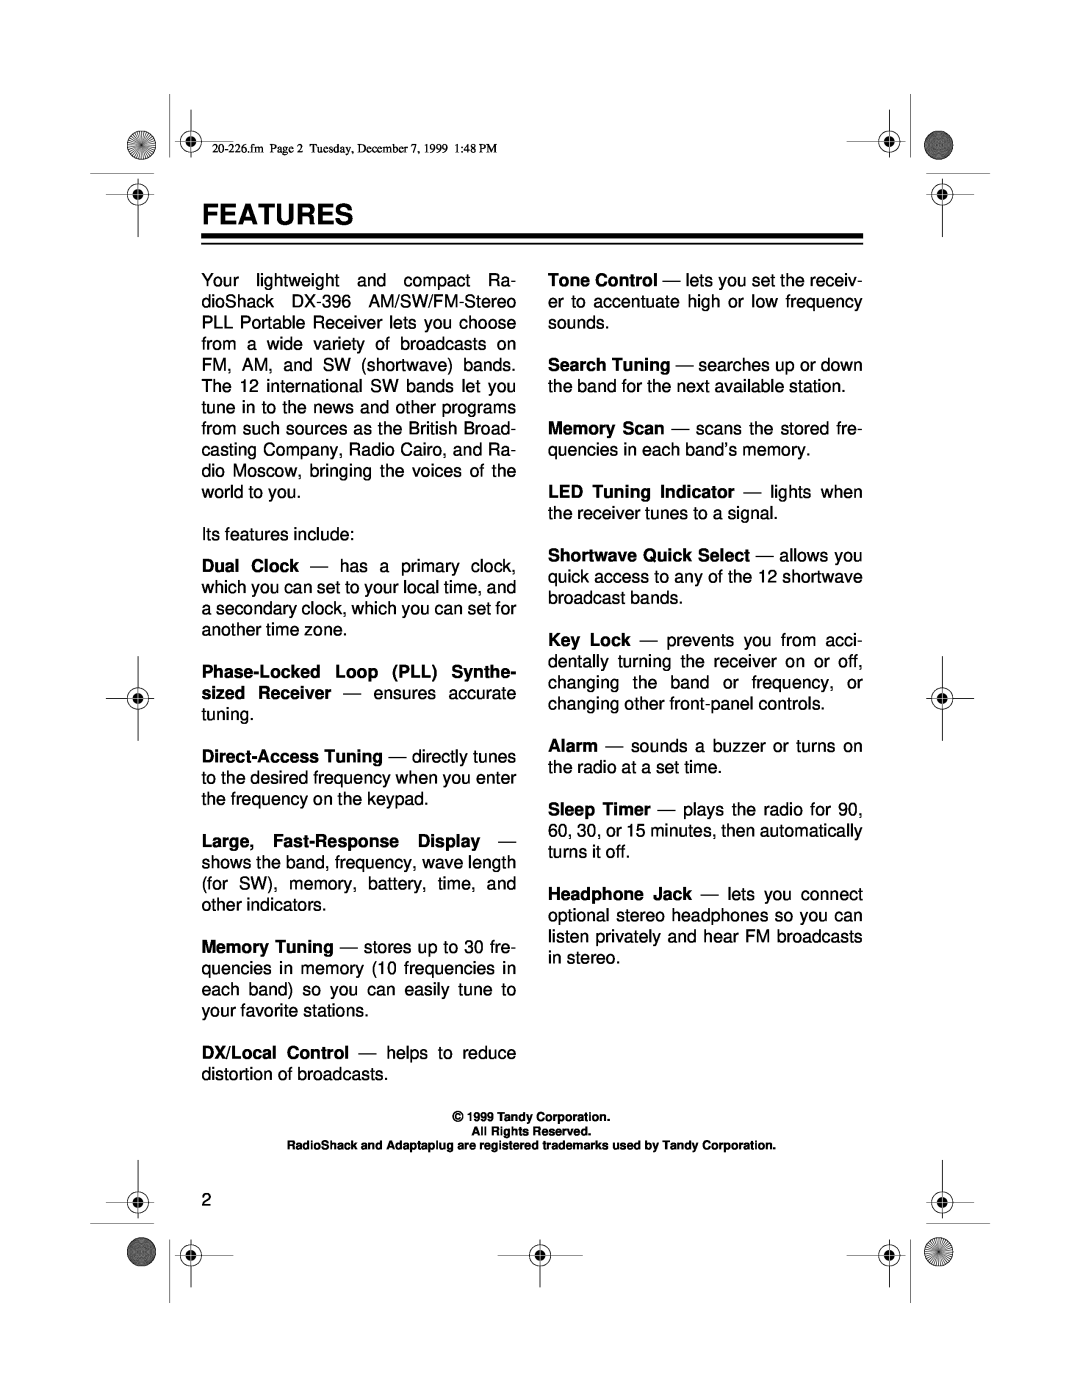 Radio Shack DX-396 owner manual Features 